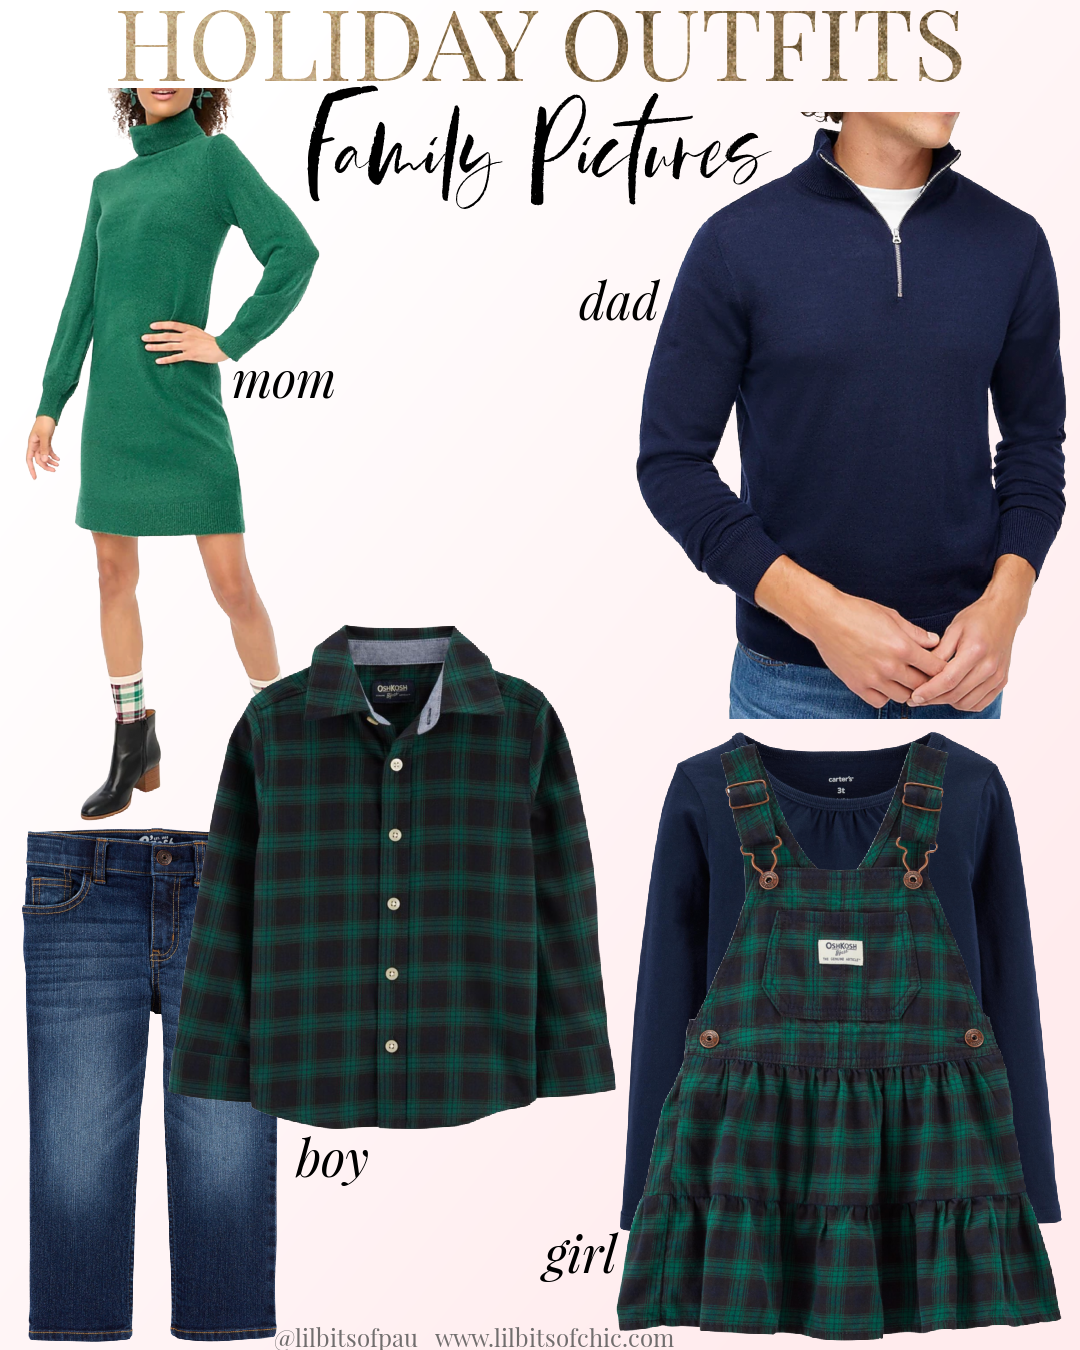 Holiday outfits for Family Pictures, plaid kids clothes, how to coordinate outfits with the family